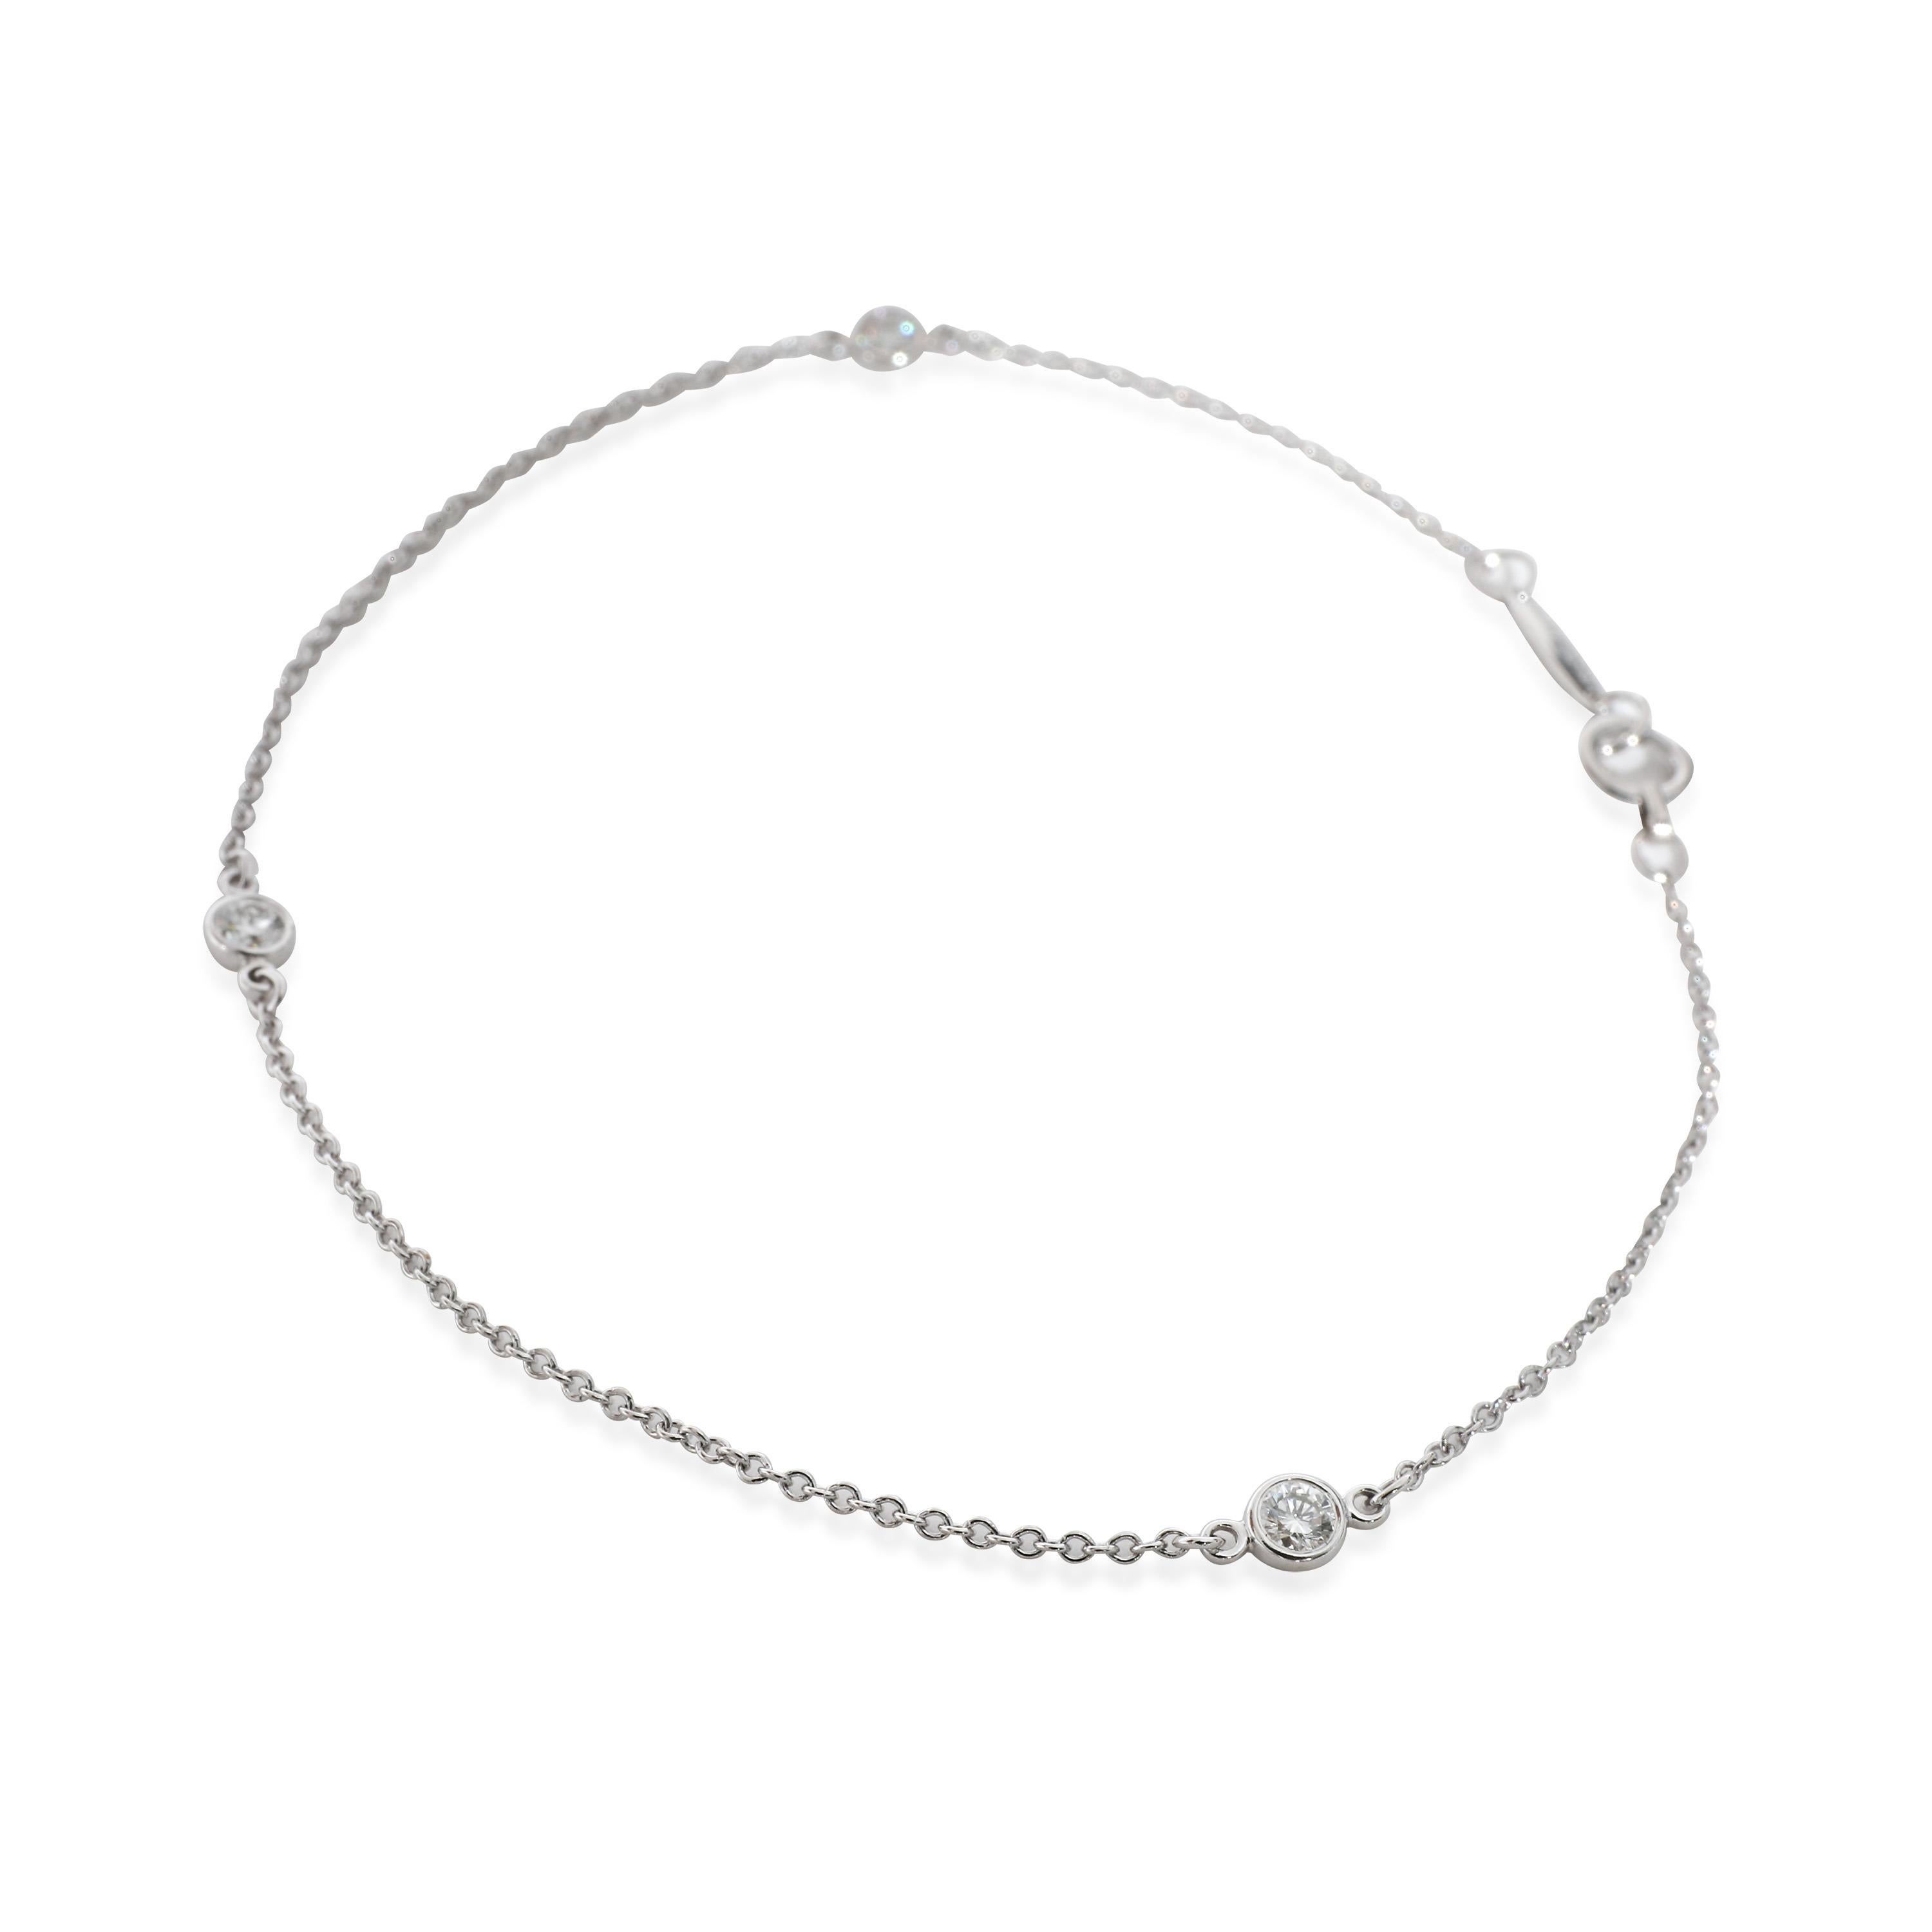 Tiffany & Co. Elsa Peretti Diamond by the Yard Bracelet in Platinum 0.15 CTW In Excellent Condition For Sale In New York, NY